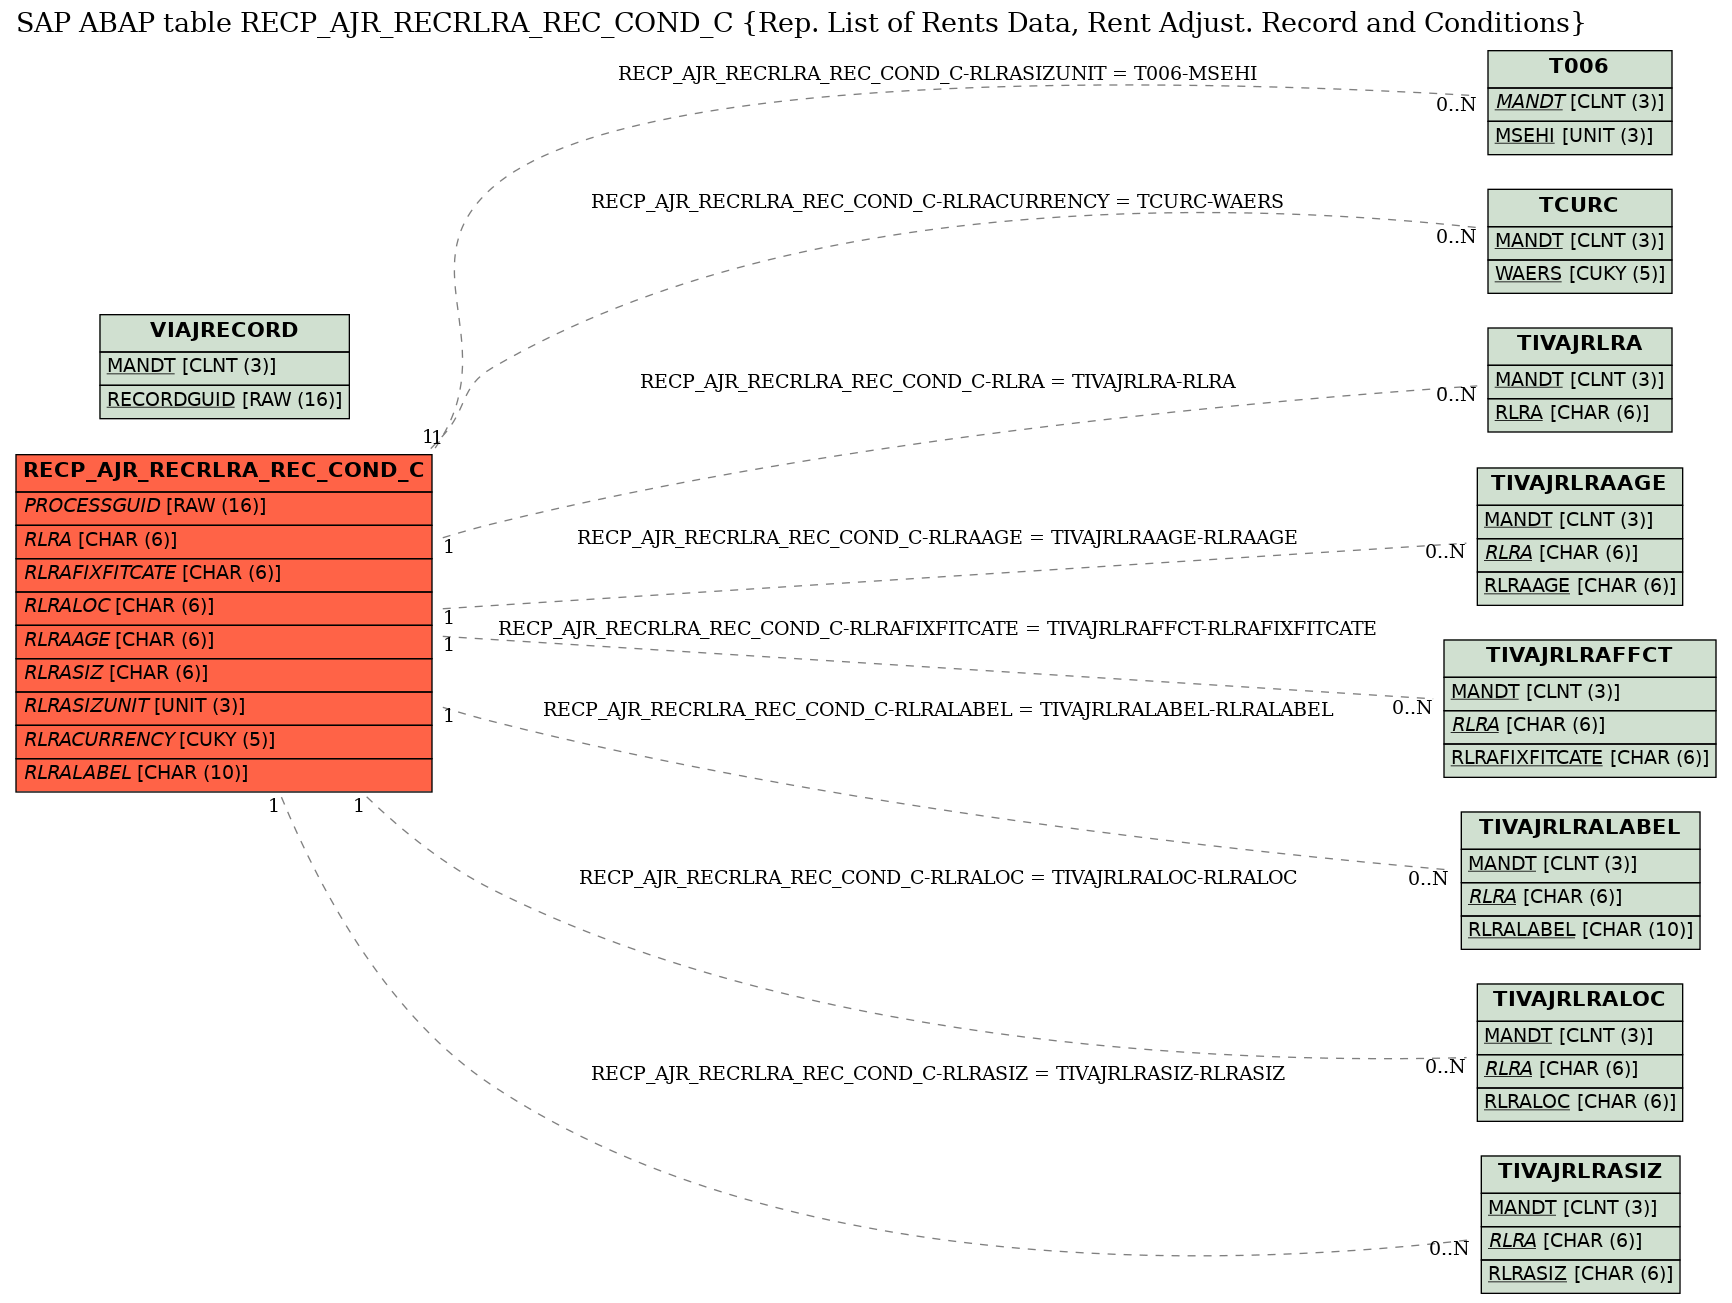 E-R Diagram for table RECP_AJR_RECRLRA_REC_COND_C (Rep. List of Rents Data, Rent Adjust. Record and Conditions)